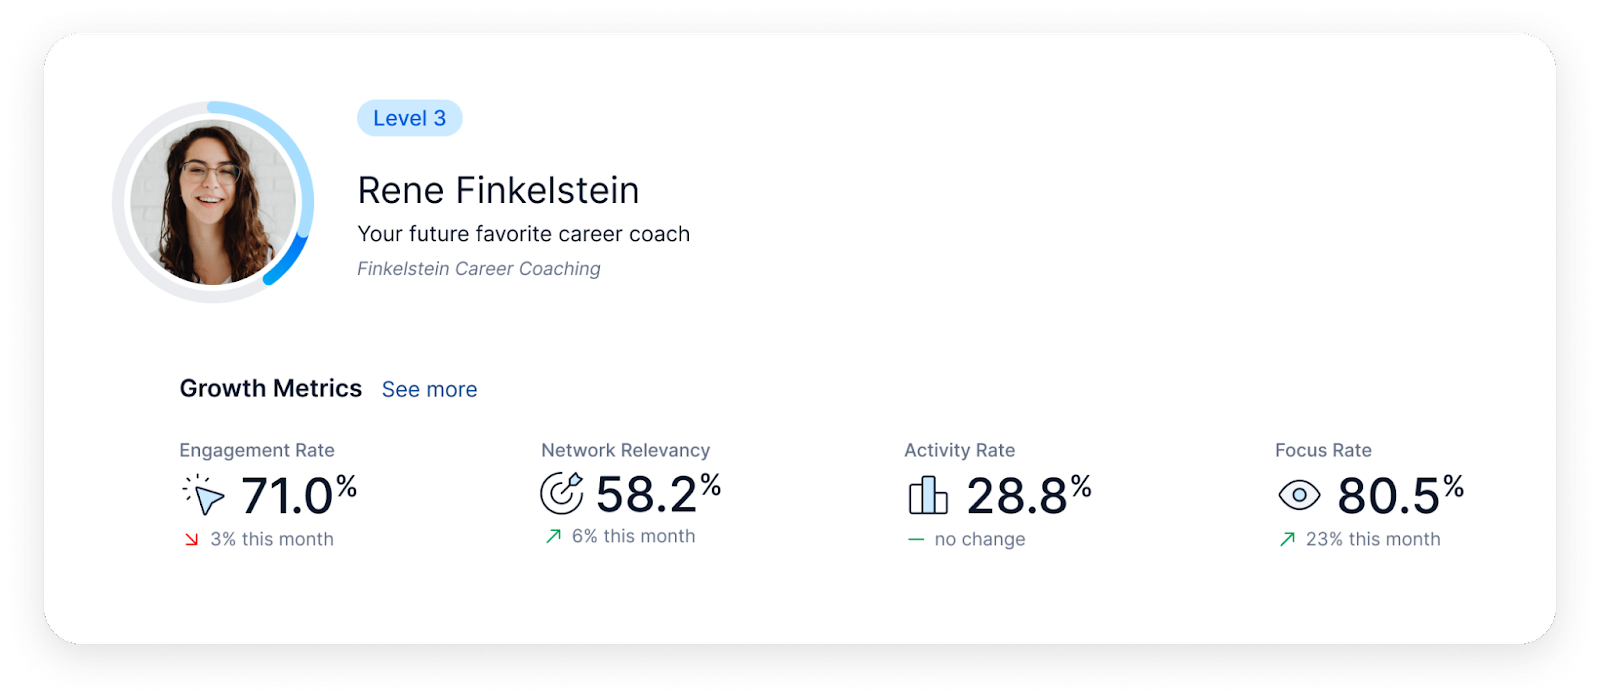 Queue's dashboard offers a snapshot of custom growth metrics for a LinkedIn career coach, displaying engagement, network relevancy, activity, and focus rates, enabling efficient tracking and improvement of online professional presence.